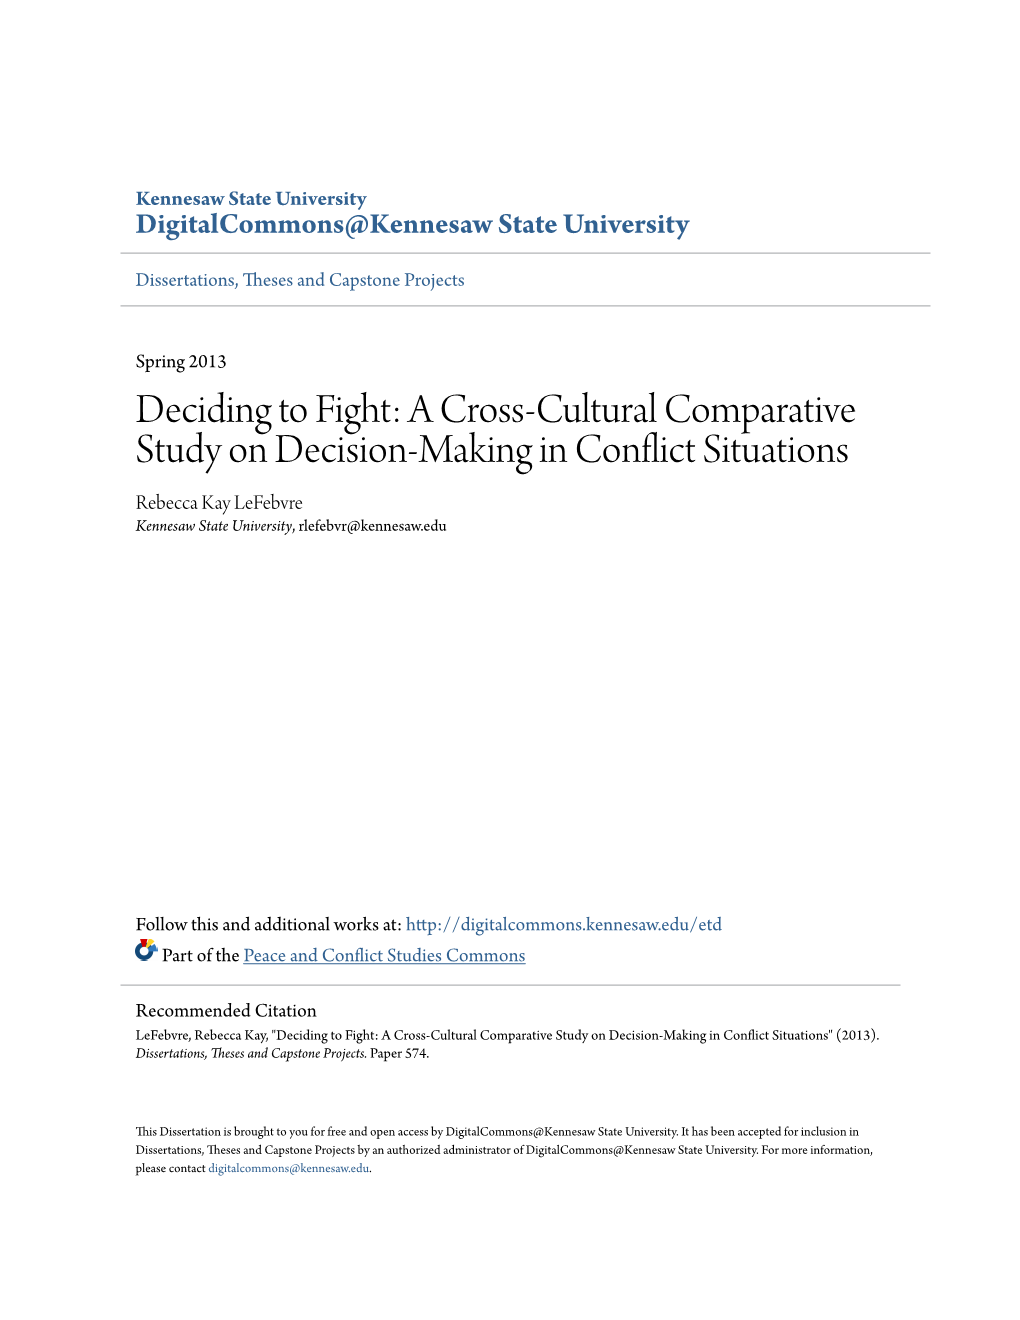 A Cross-Cultural Comparative Study on Decision-Making in Conflict Situations Rebecca Kay Lefebvre Kennesaw State University, Rlefebvr@Kennesaw.Edu